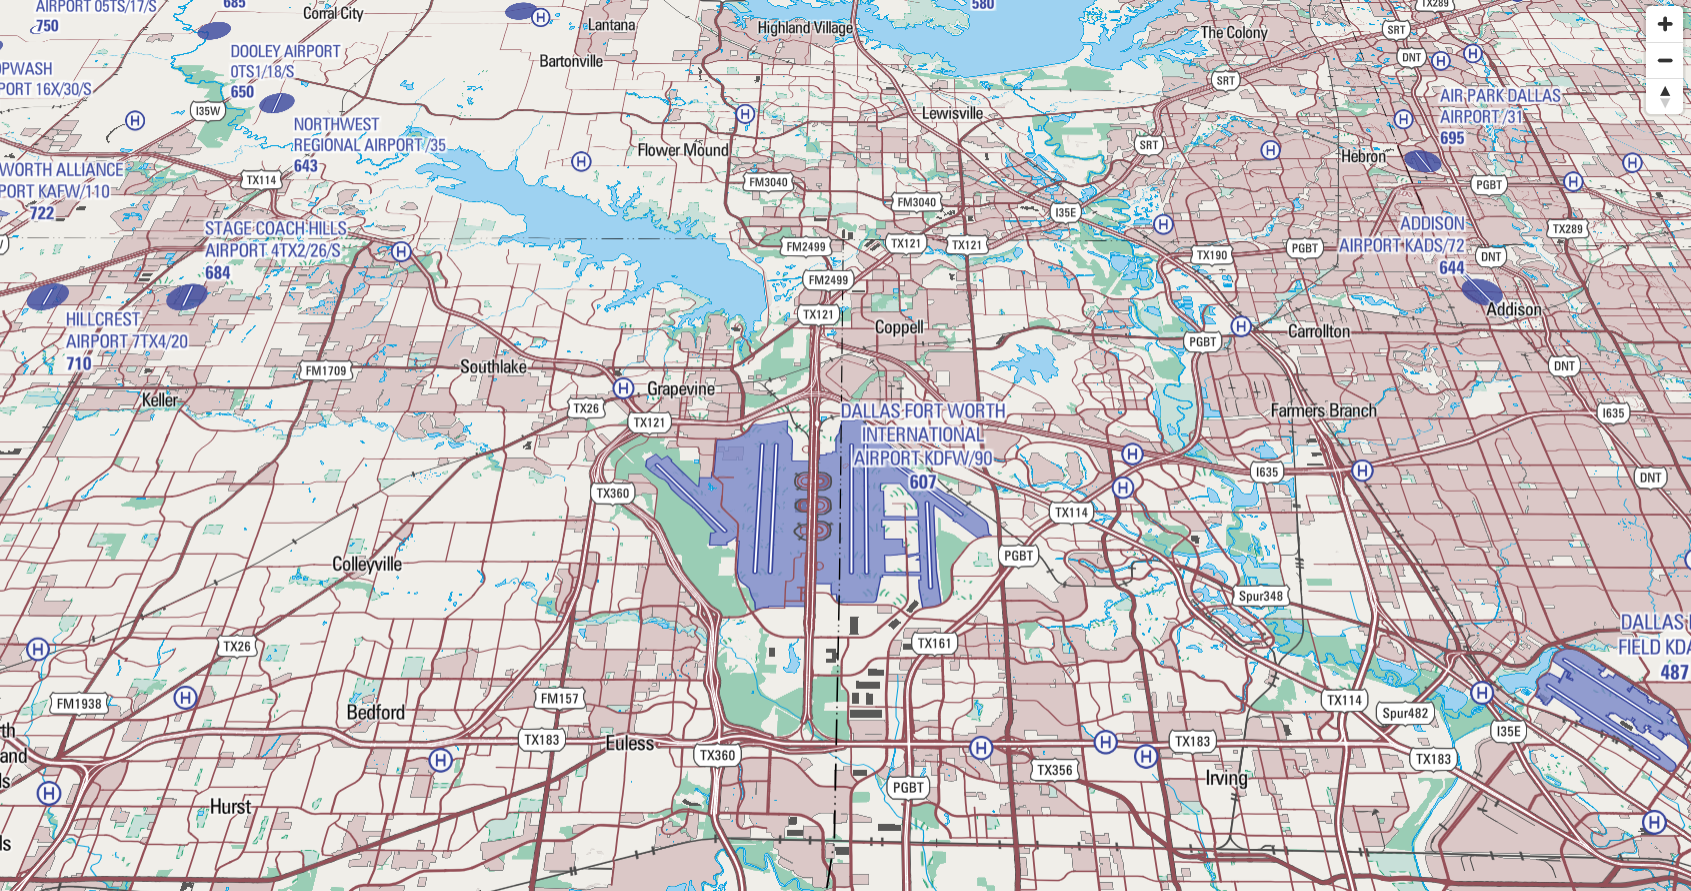 Releasable Basemap Tile image of the Dallas-Fort Worth Airport in the topographic style.